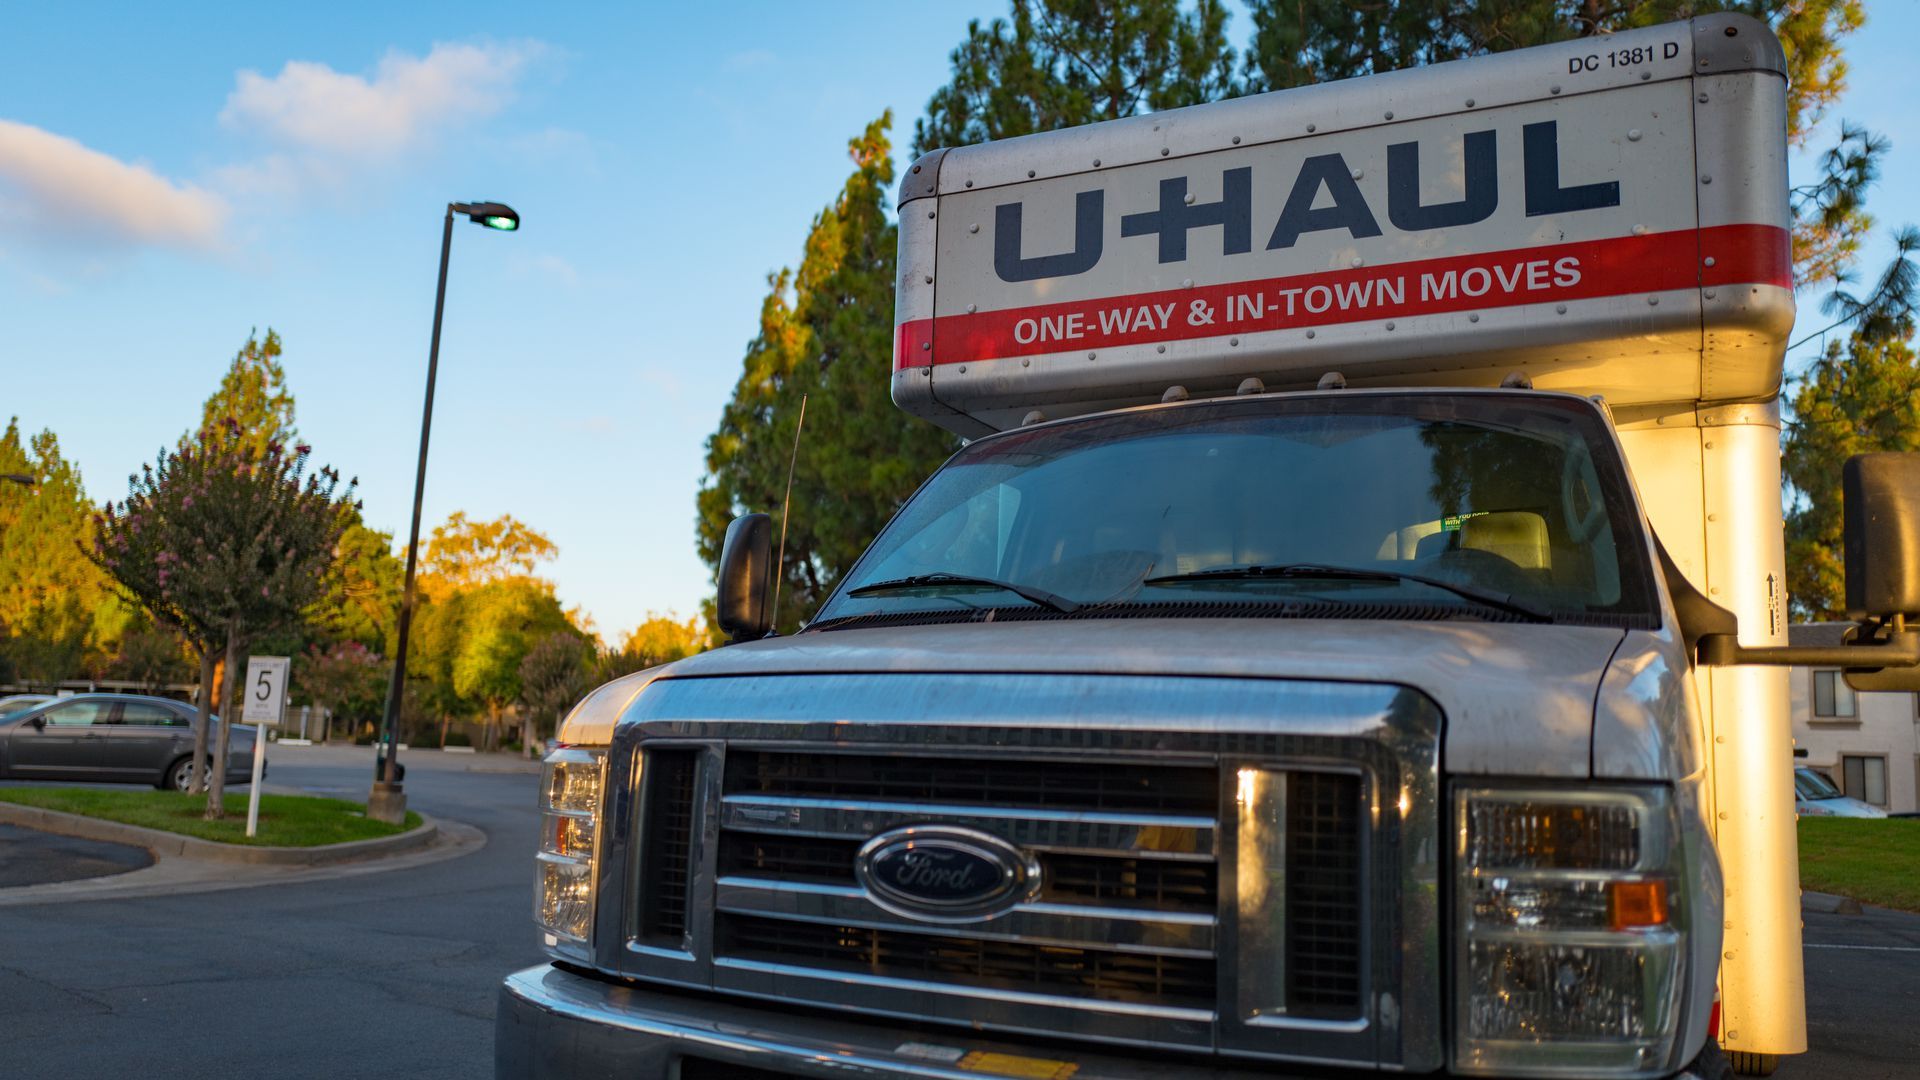 This image shows a U-Haul truck 